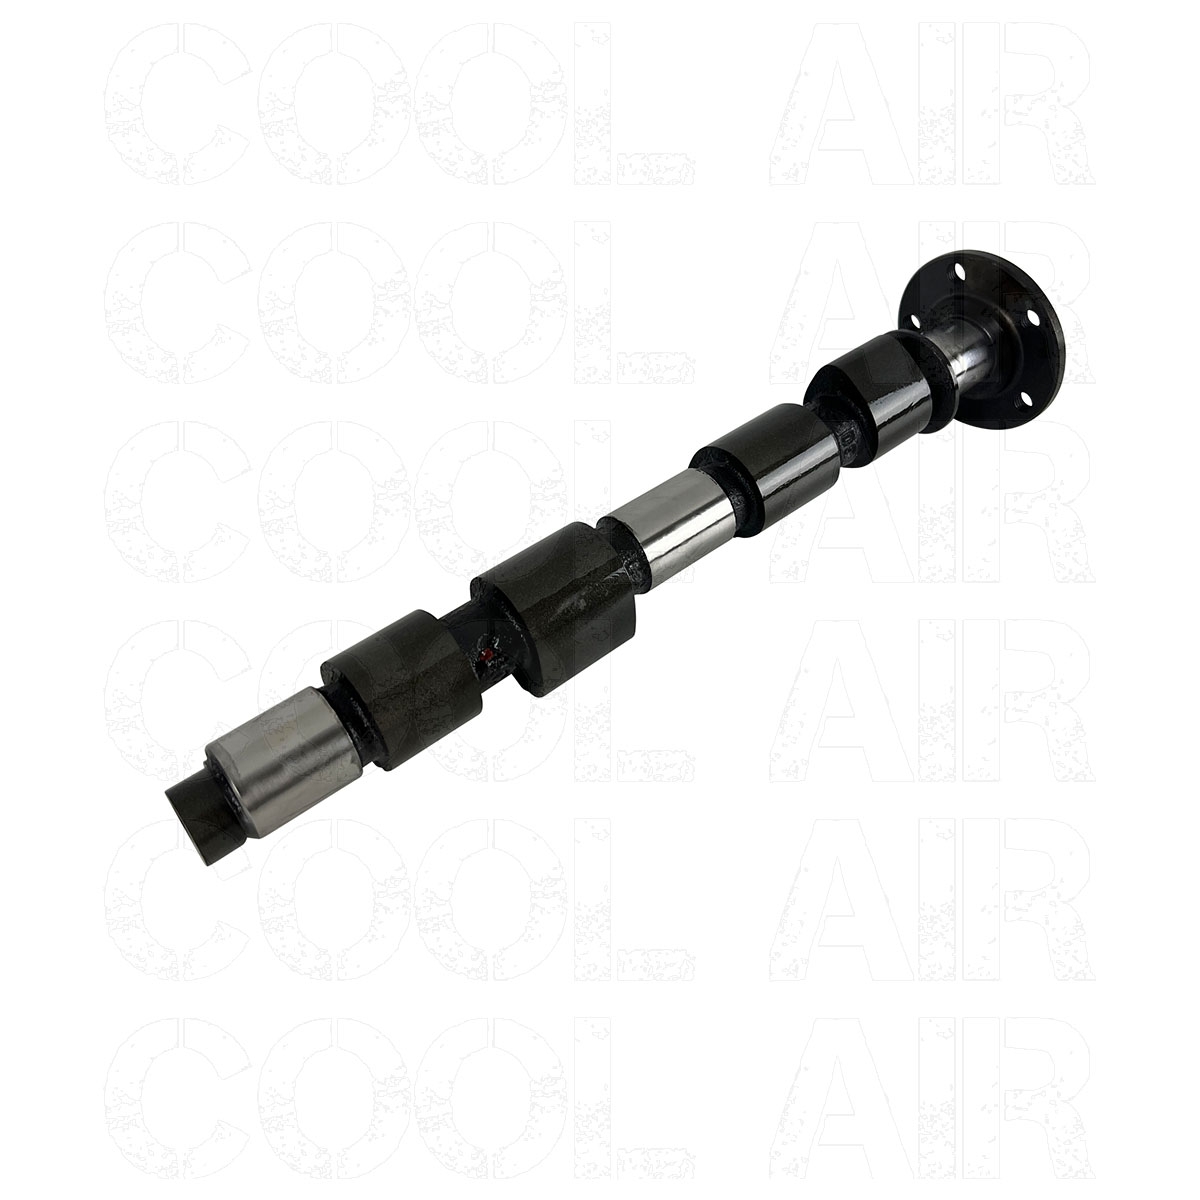 Hydraulic Camshaft Follower CT/1700-2000cc Type 4/Waterboxer 022109309 > T2 Bay 